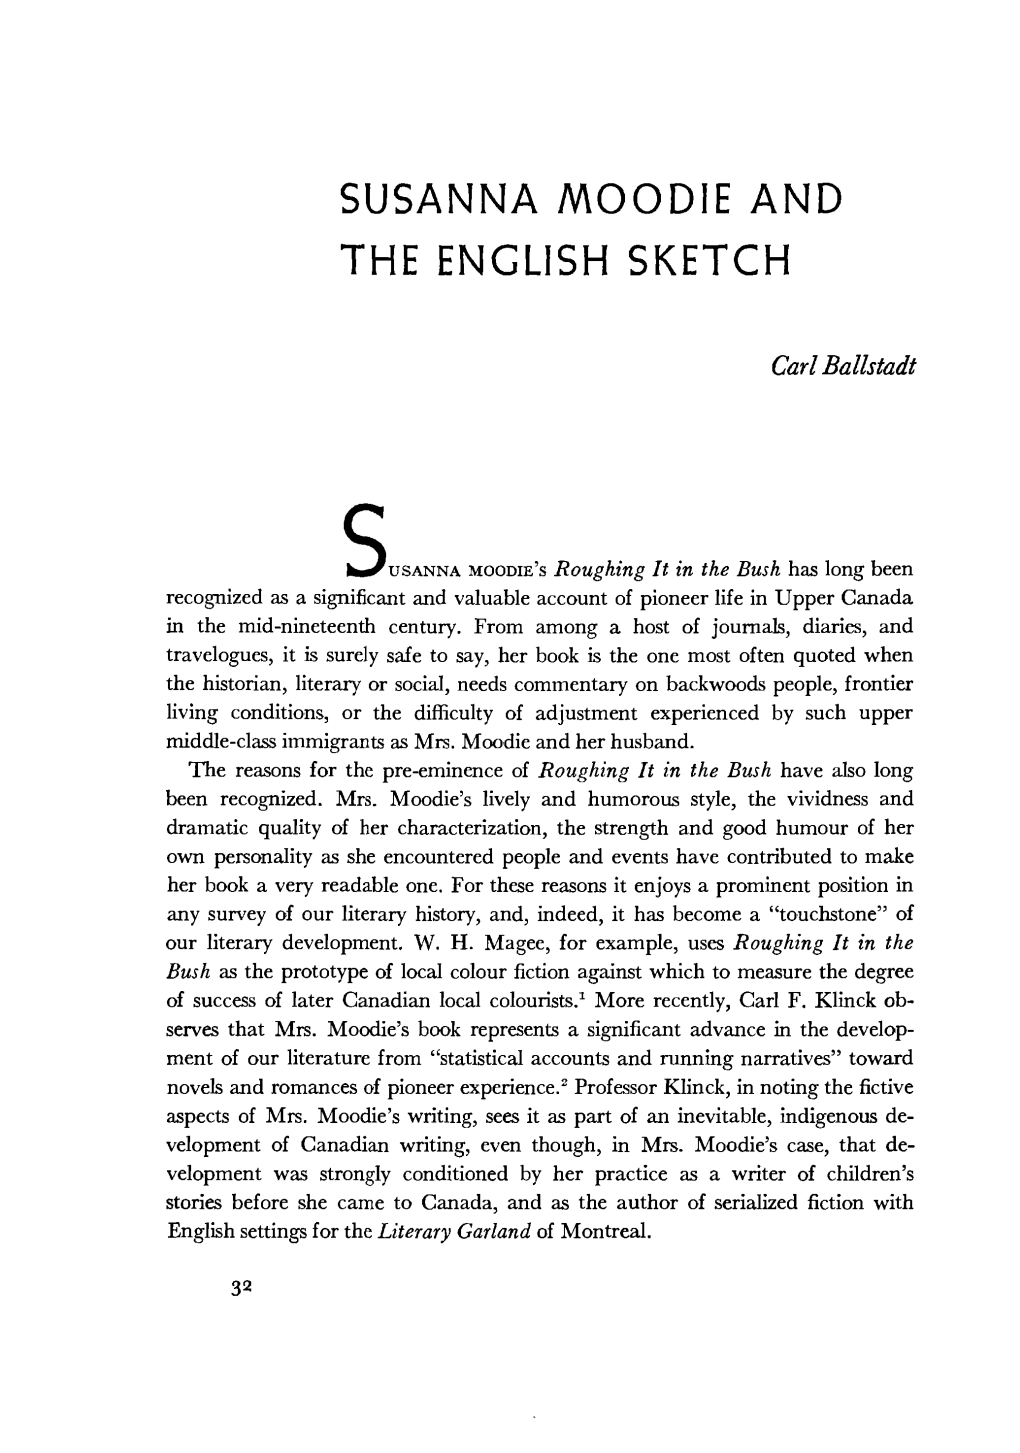 Susanna Moodie and the English Sketch